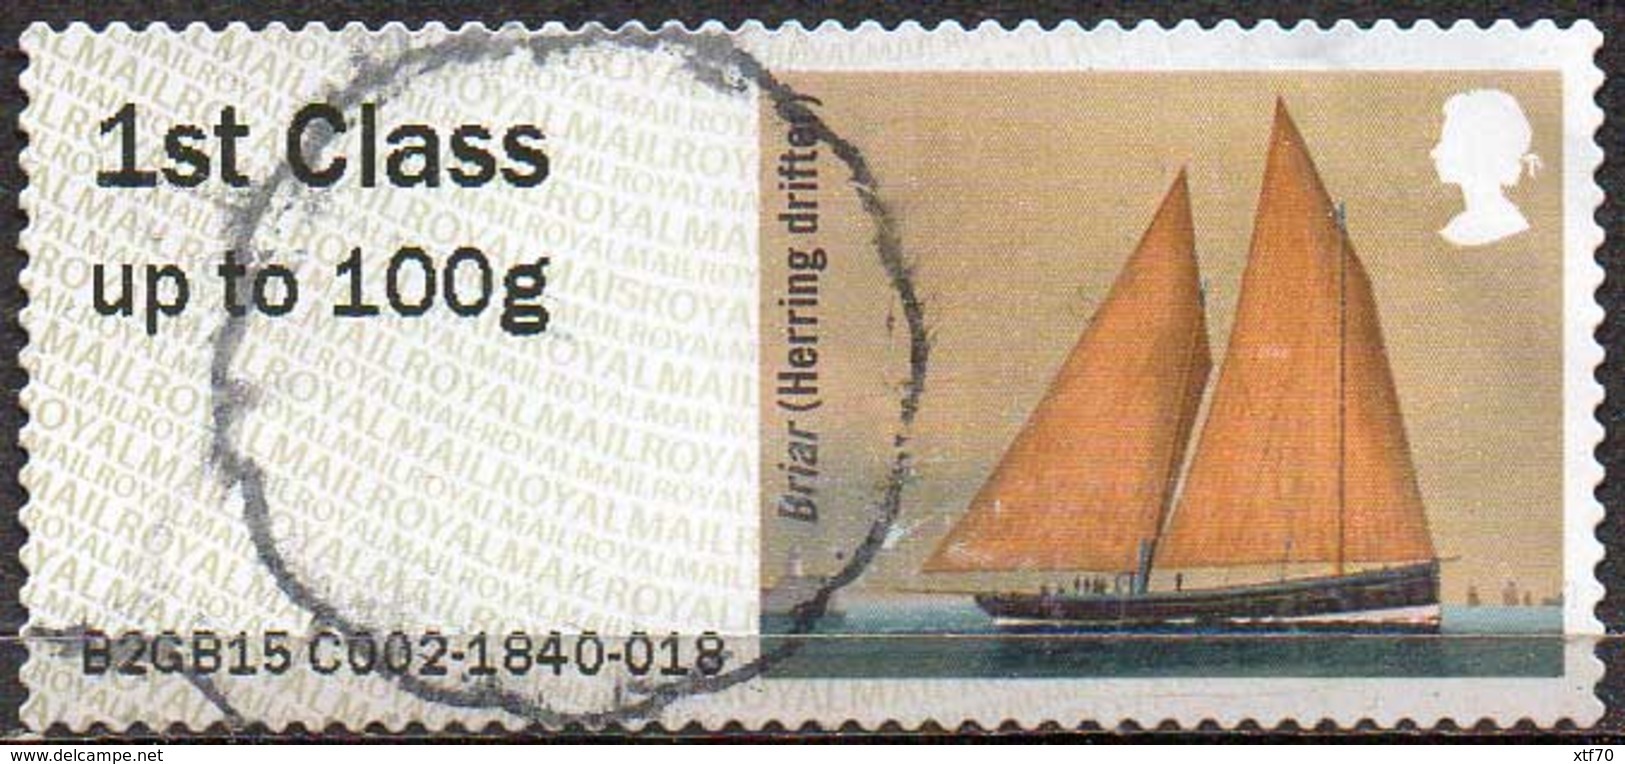 GREAT BRITAIN 2015 Post & Go: Working Sail. Briar (Herring Drifter) - Post & Go Stamps